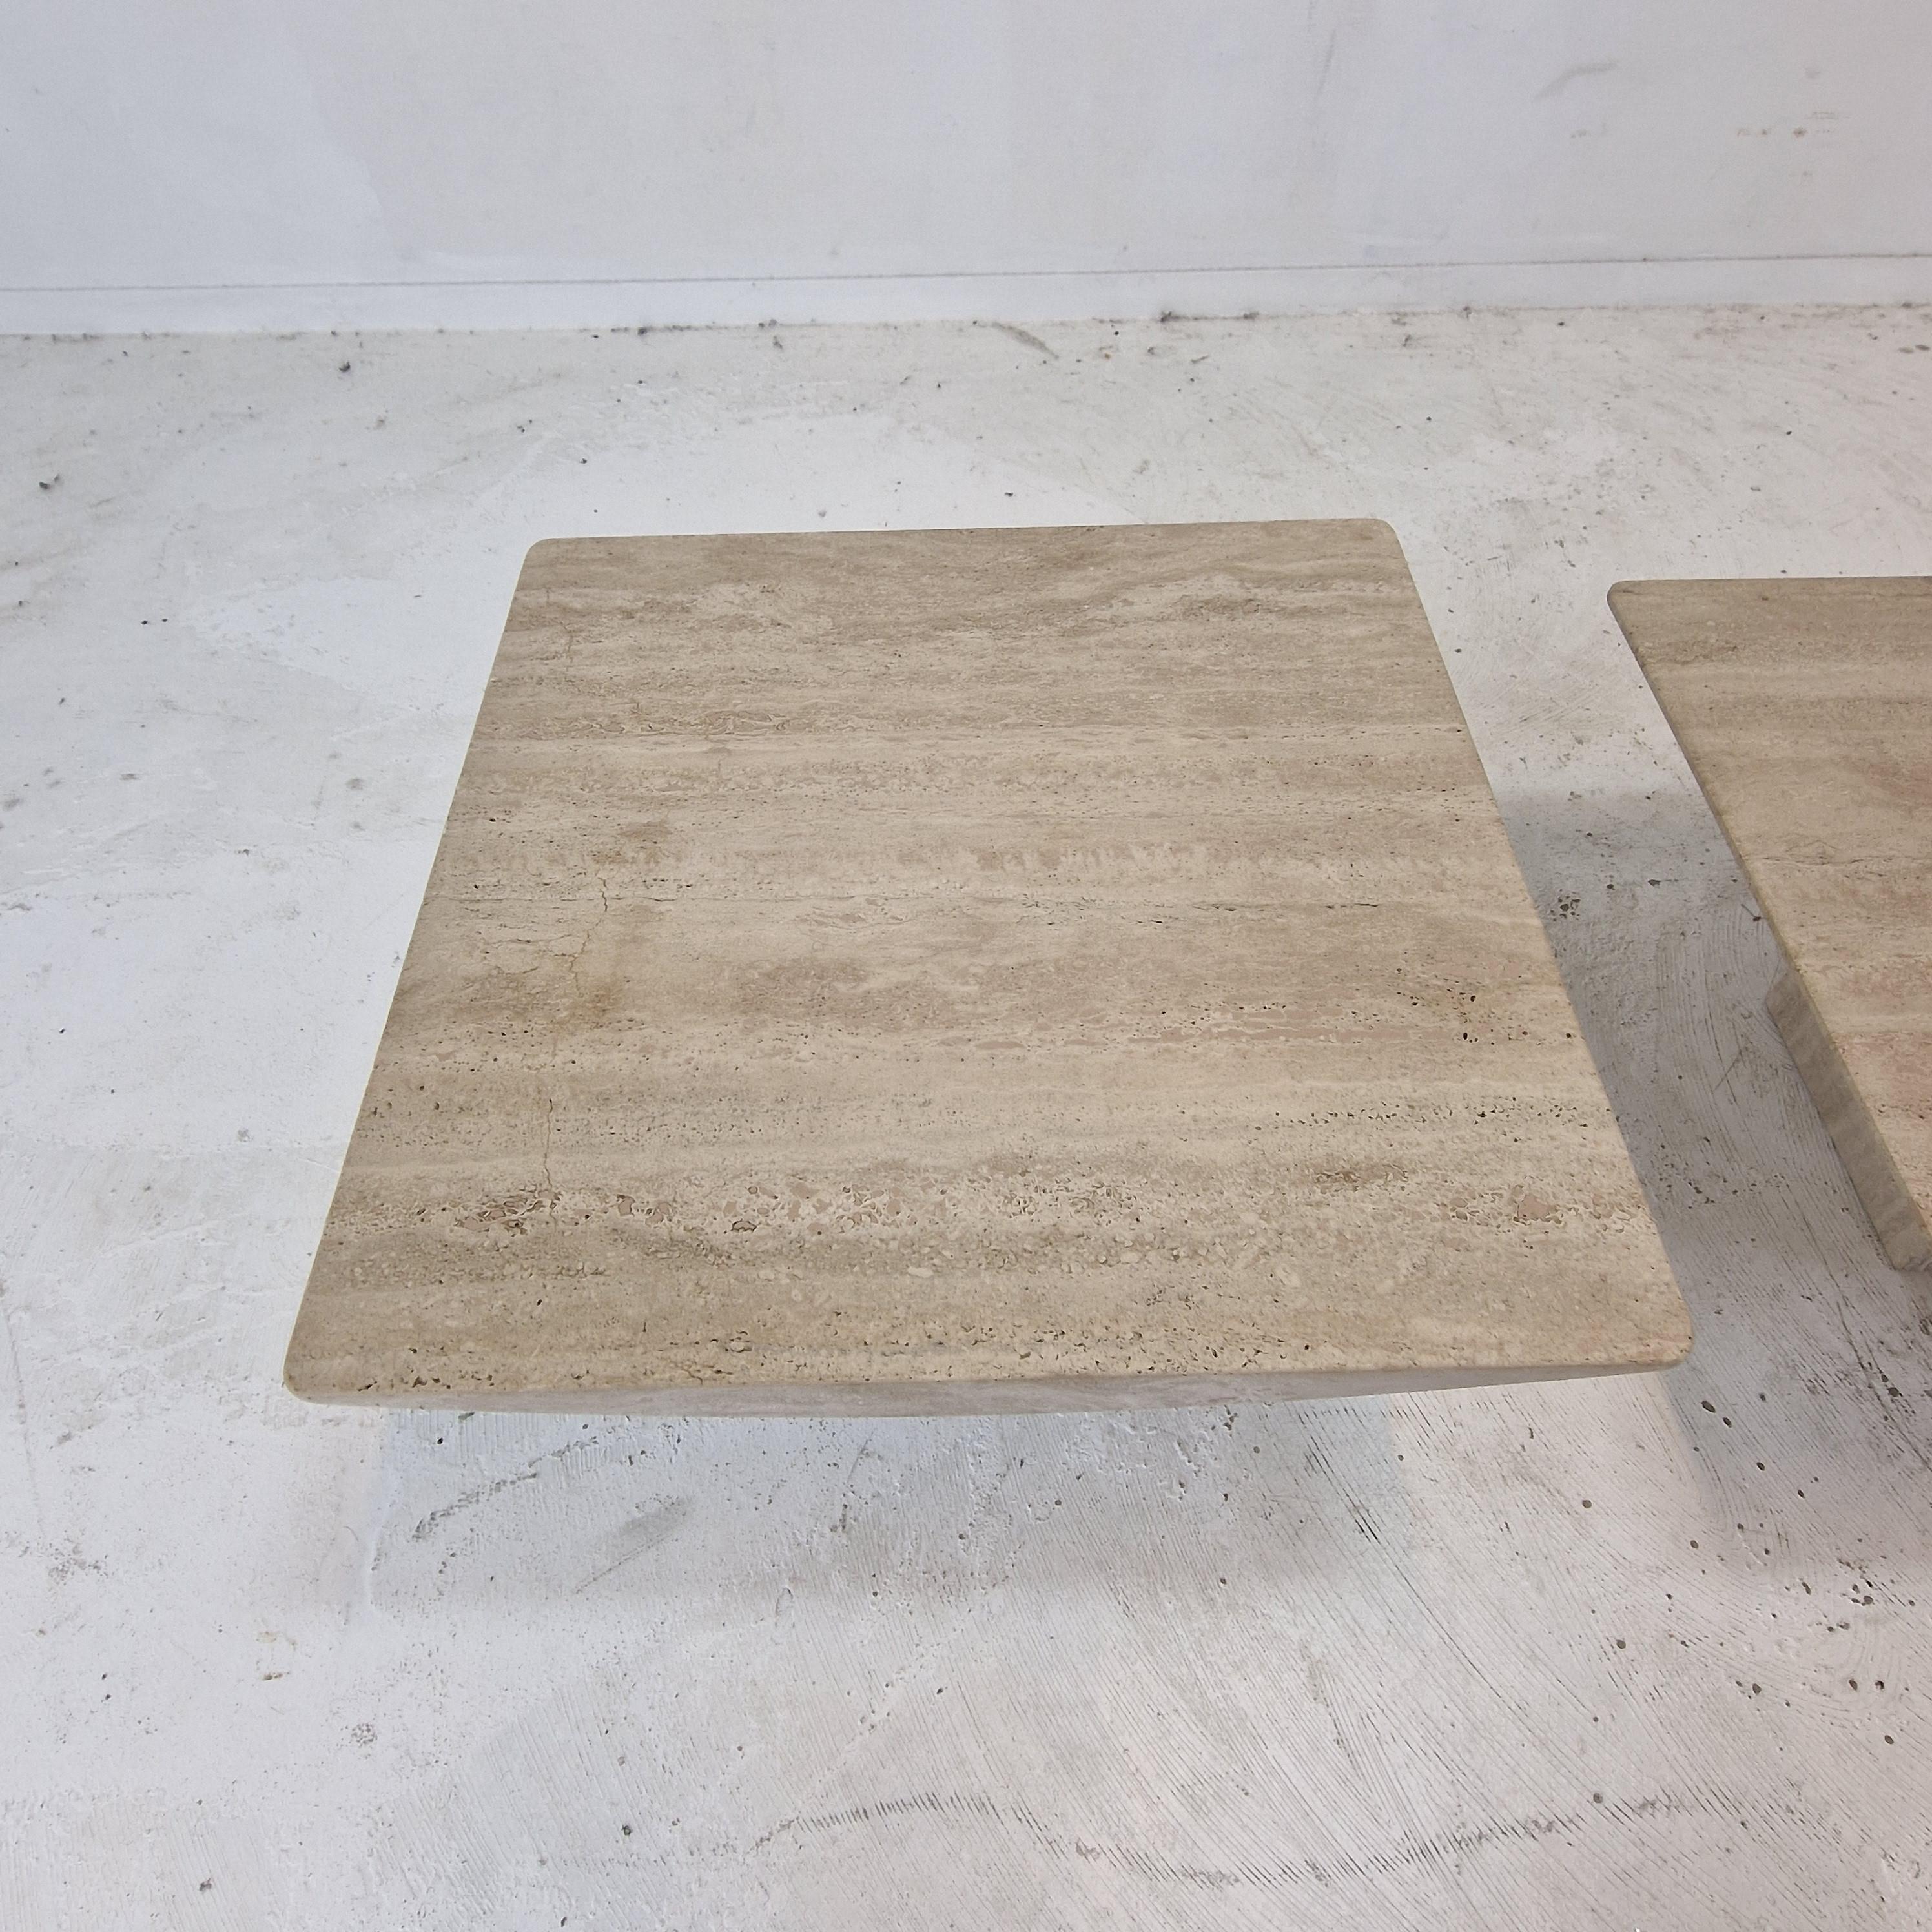 Set of 3 Italian Travertine Coffee or Side Tables, 1980s For Sale 2